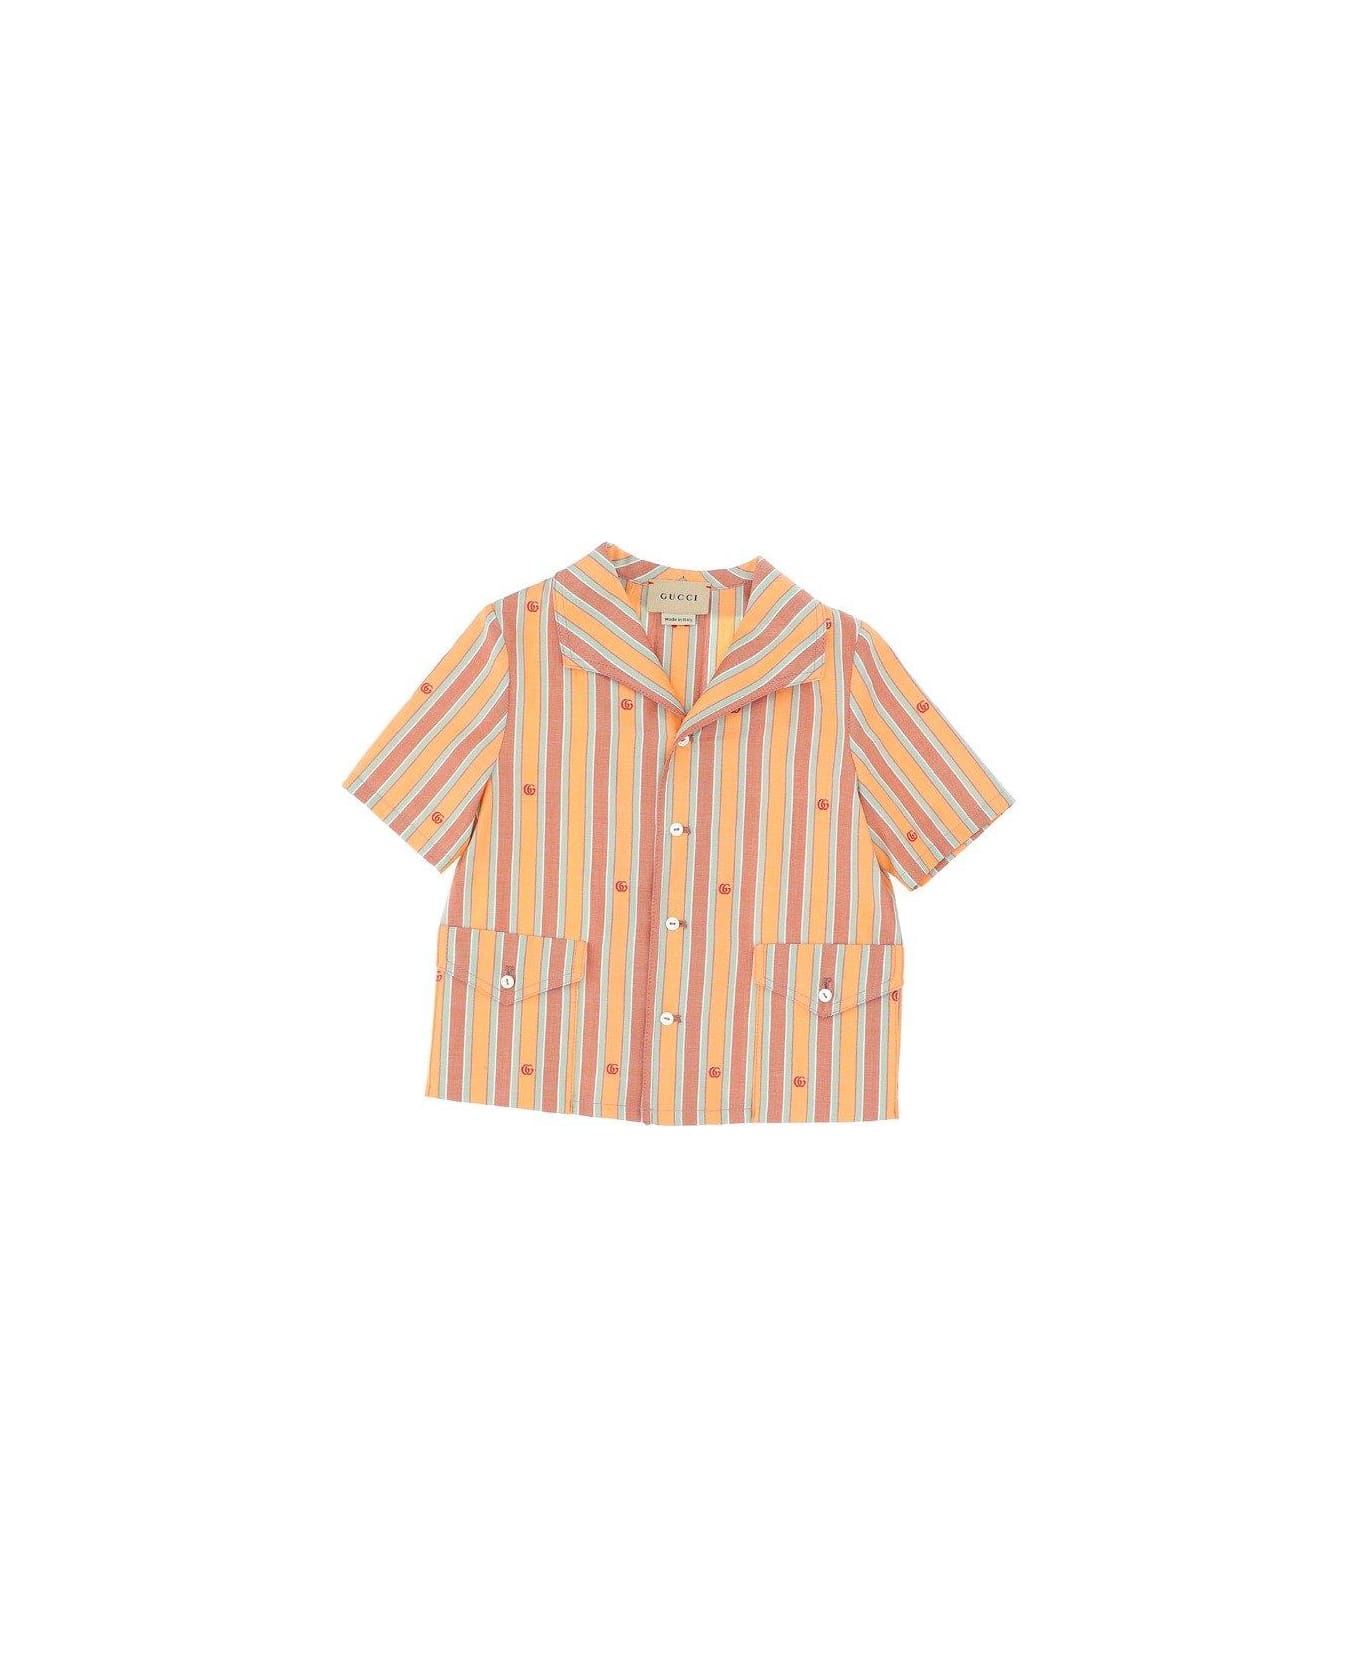 Gucci Striped Short-sleeved Shirt - Coral Water シャツ